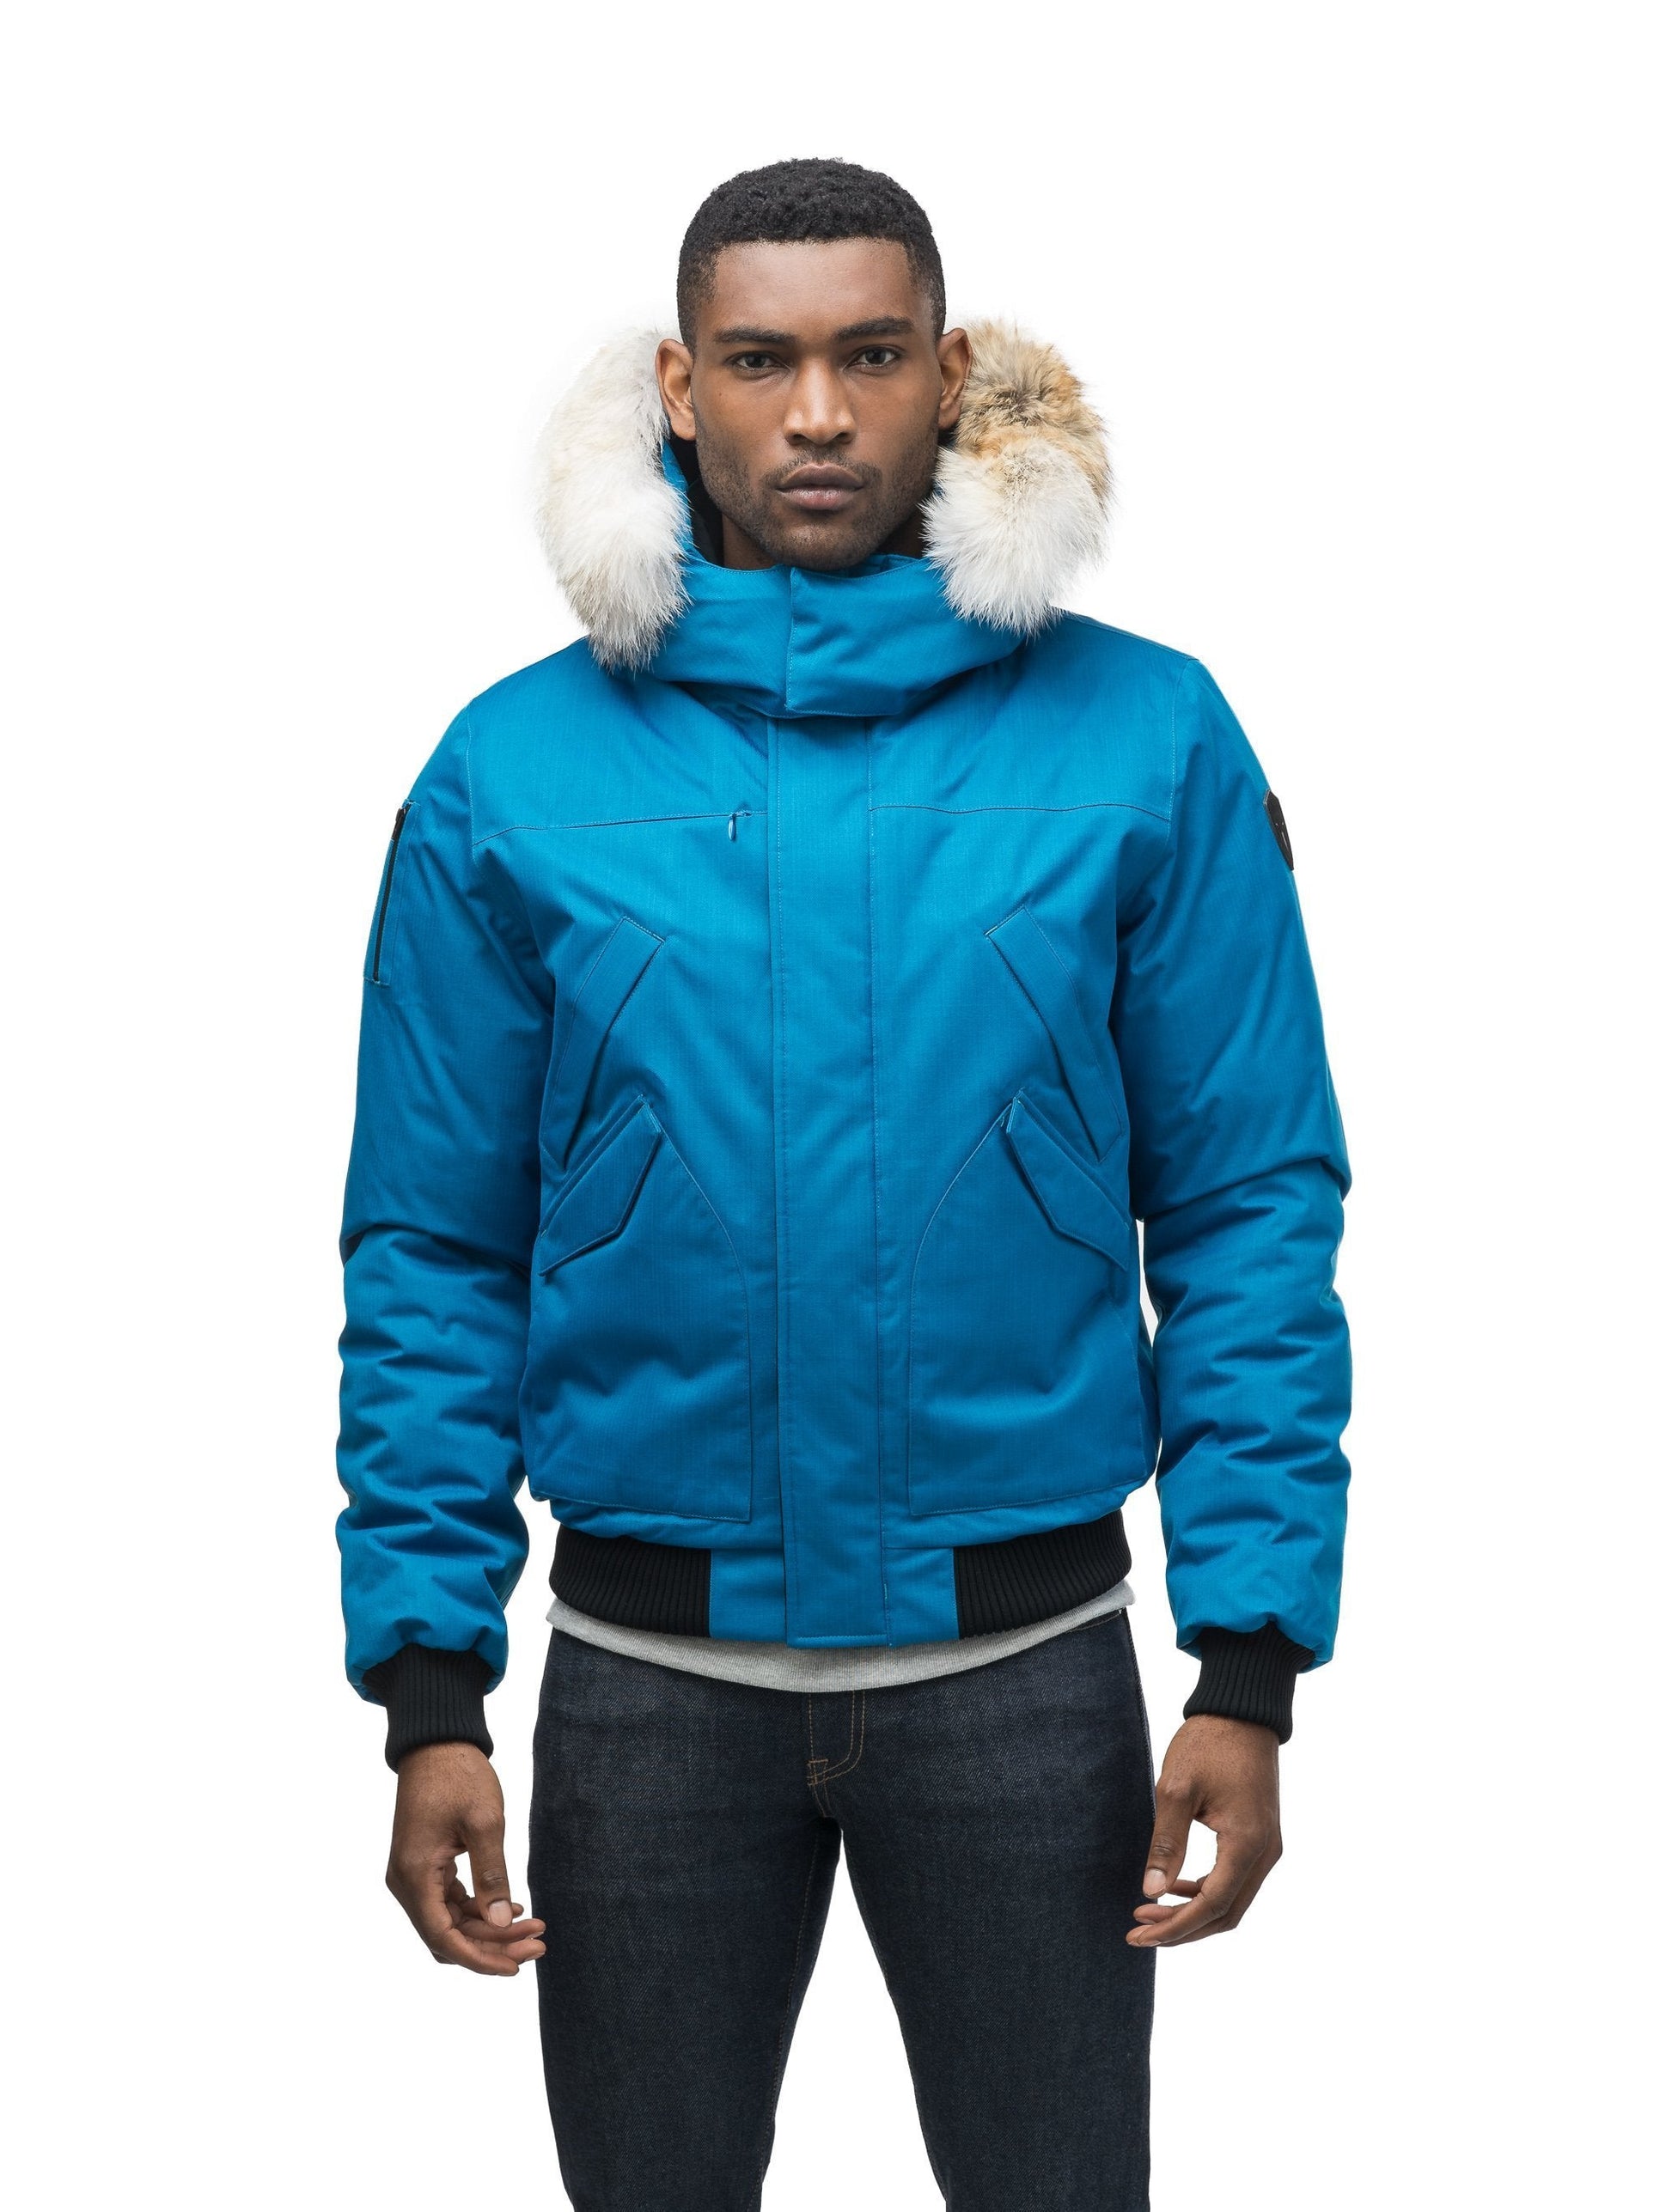 Men's classic down filled bomber jacket with a down filled hood that features a removable coyote fur trim and concealed moldable framing wire in Sea Blue